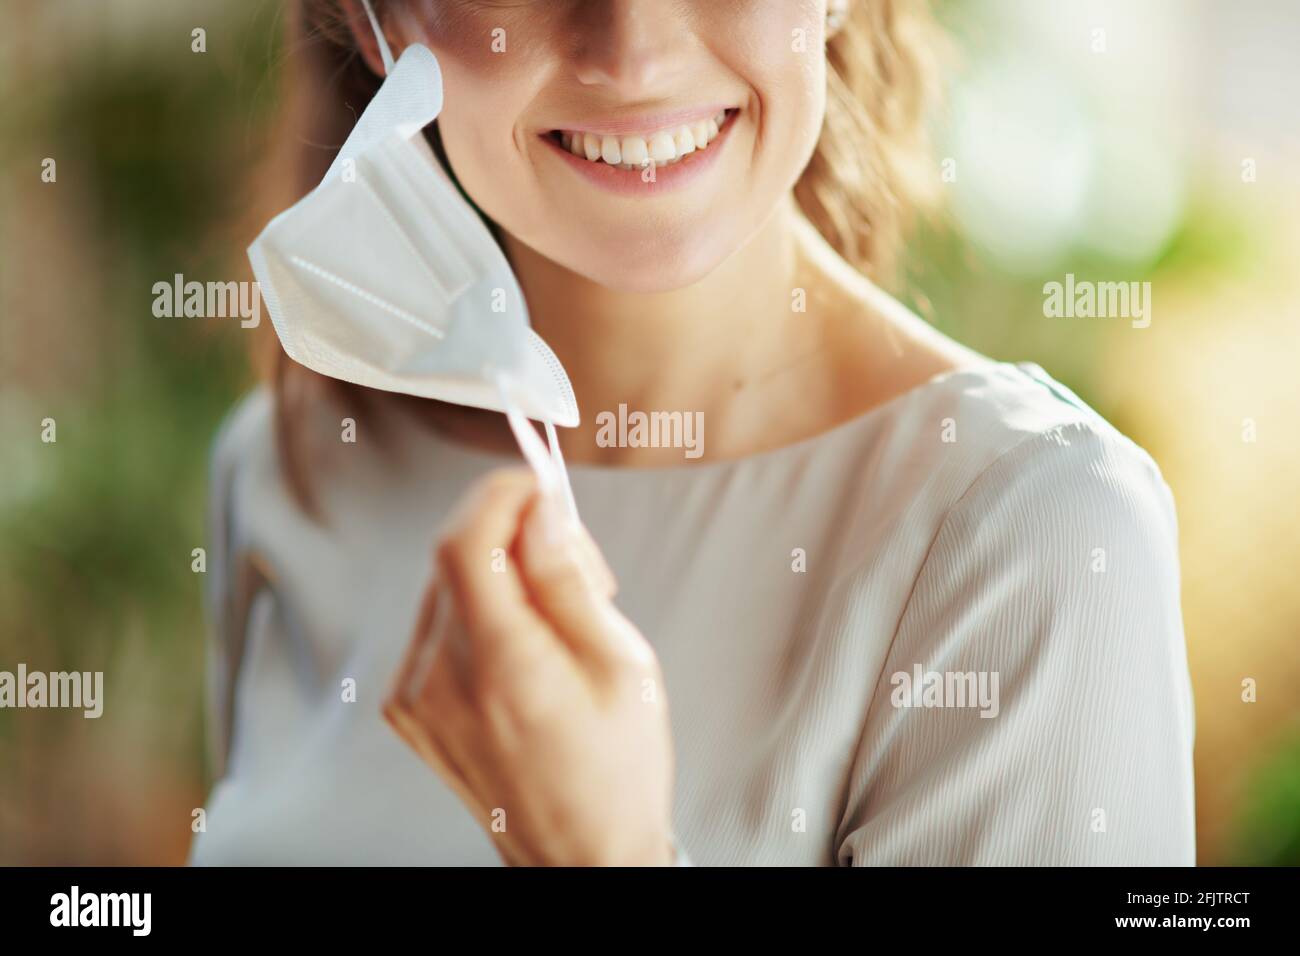 covid-19 pandemic. Closeup on smiling female in grey blouse taking off ffp2 mask. Stock Photo